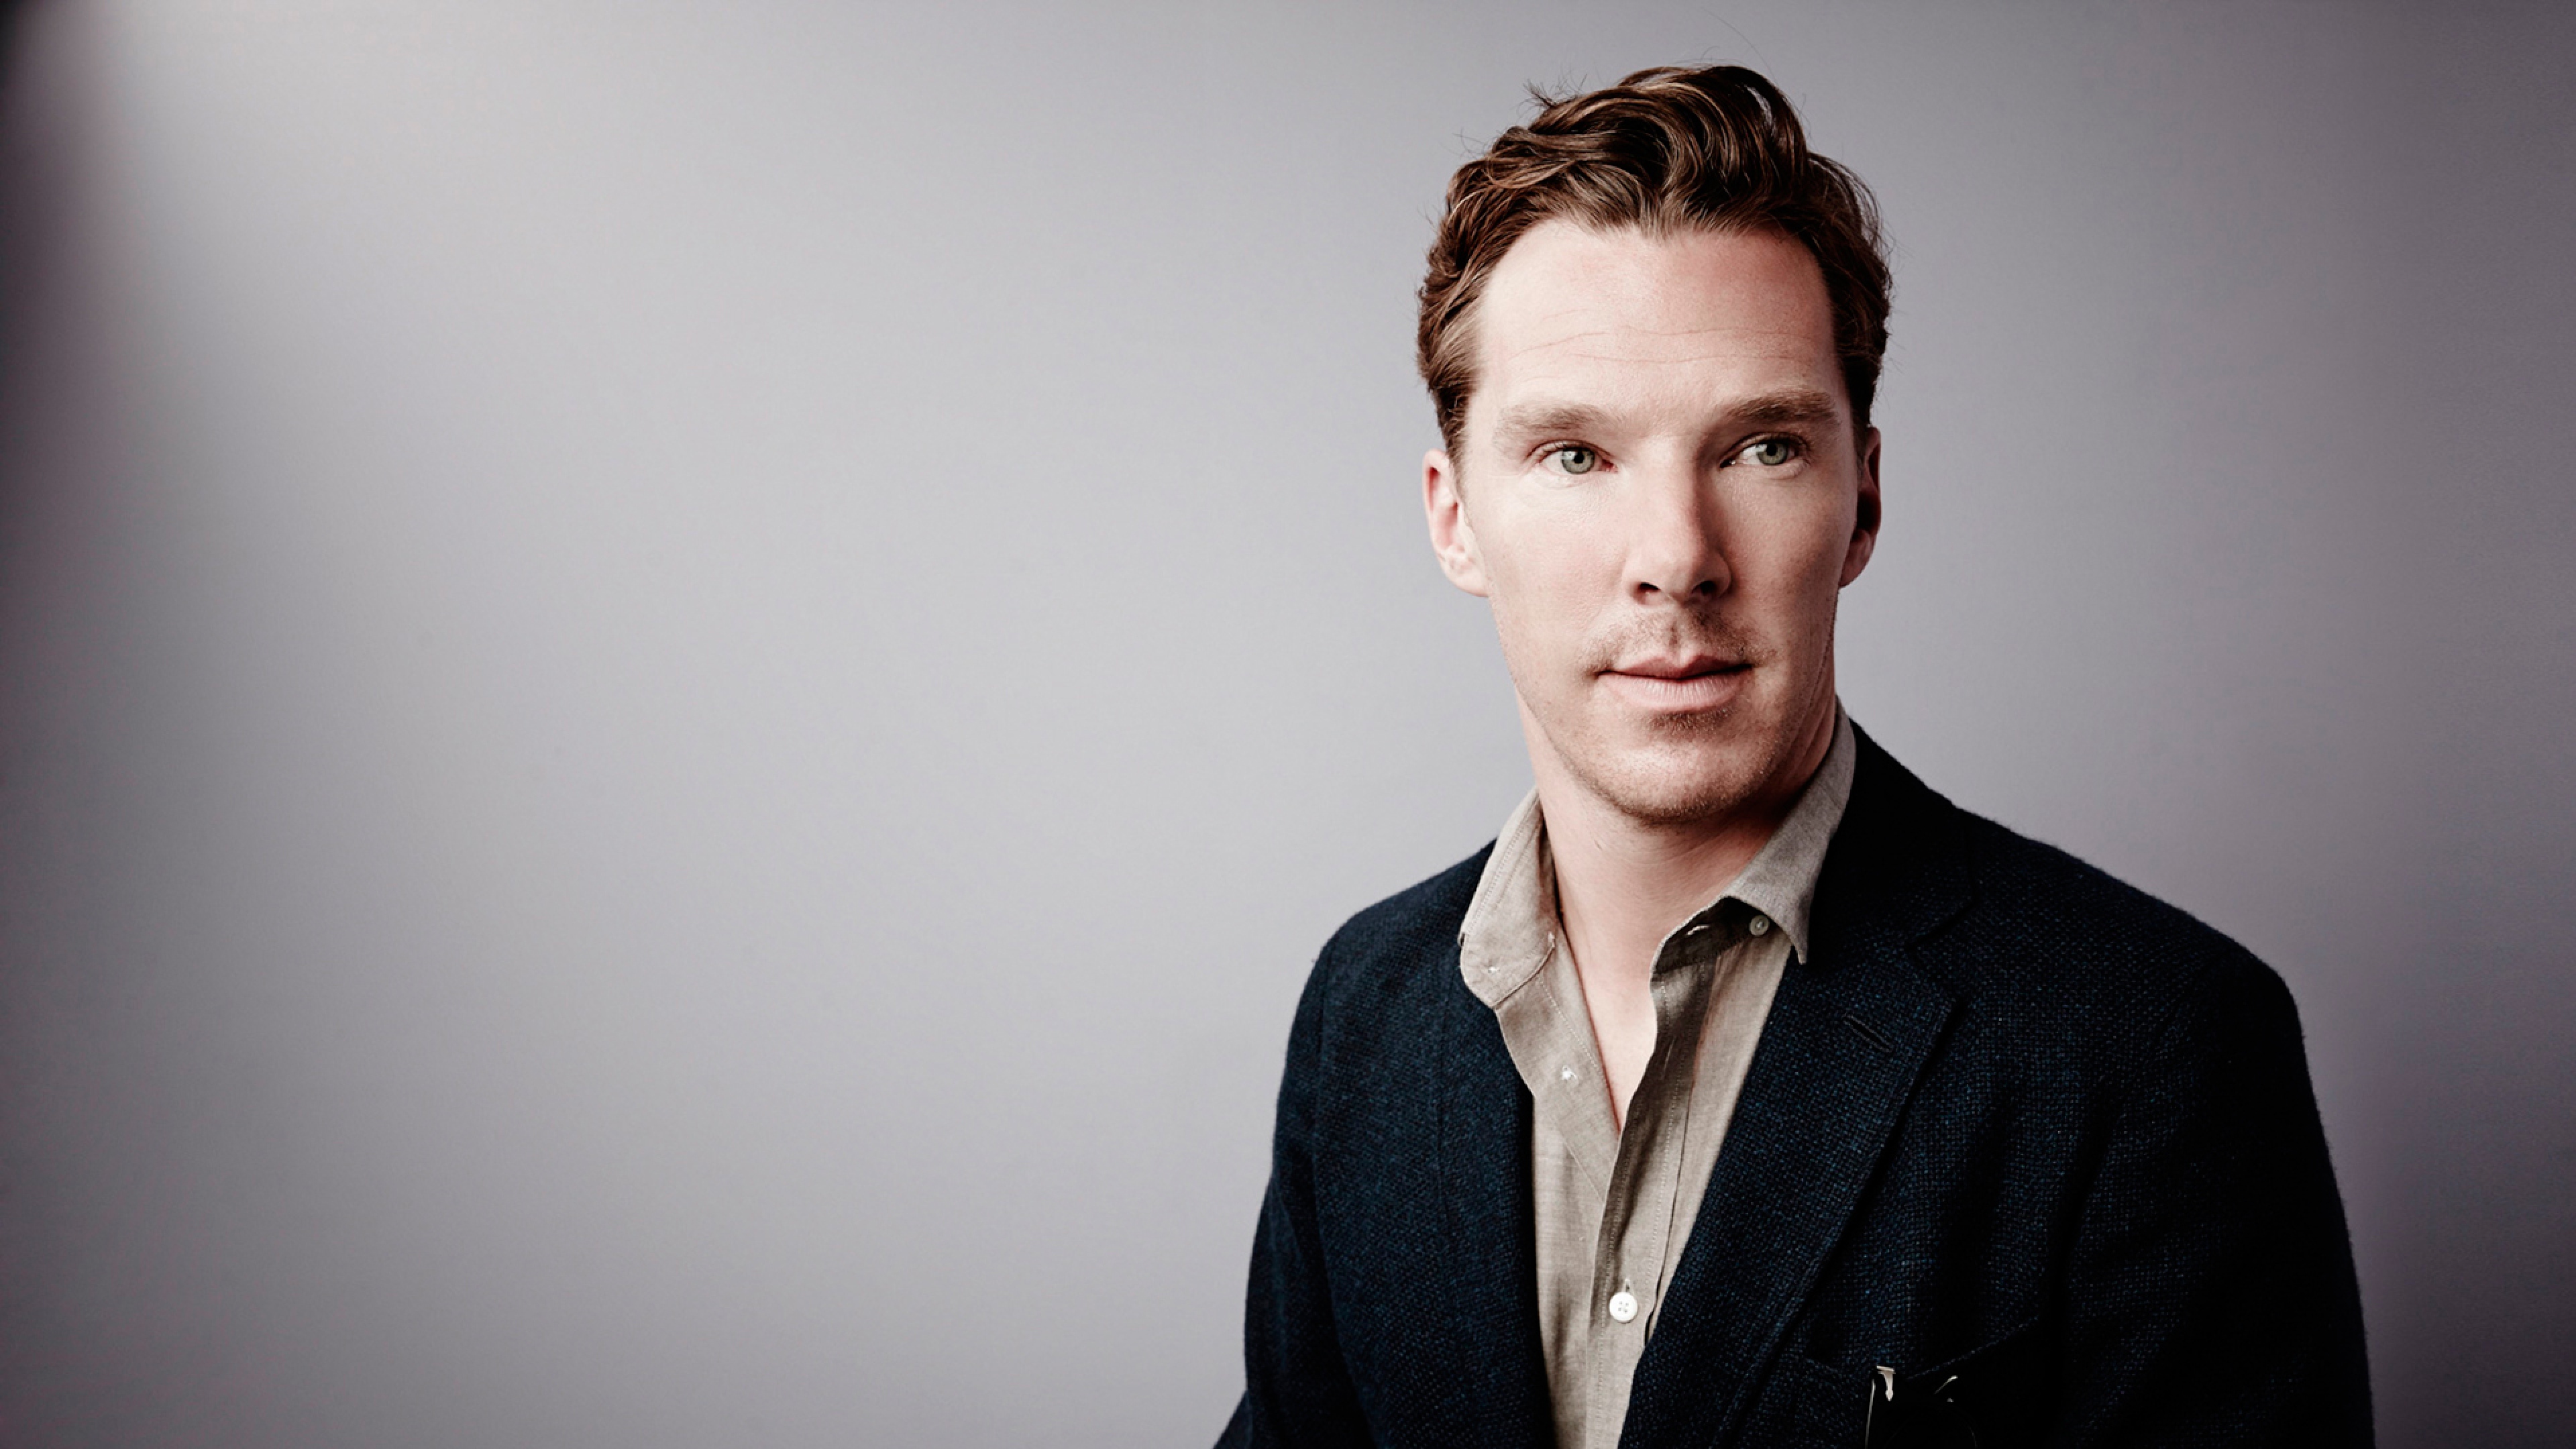 Benedict Cumberbatch Backgrounds, Compatible - PC, Mobile, Gadgets| 3840x2160 px